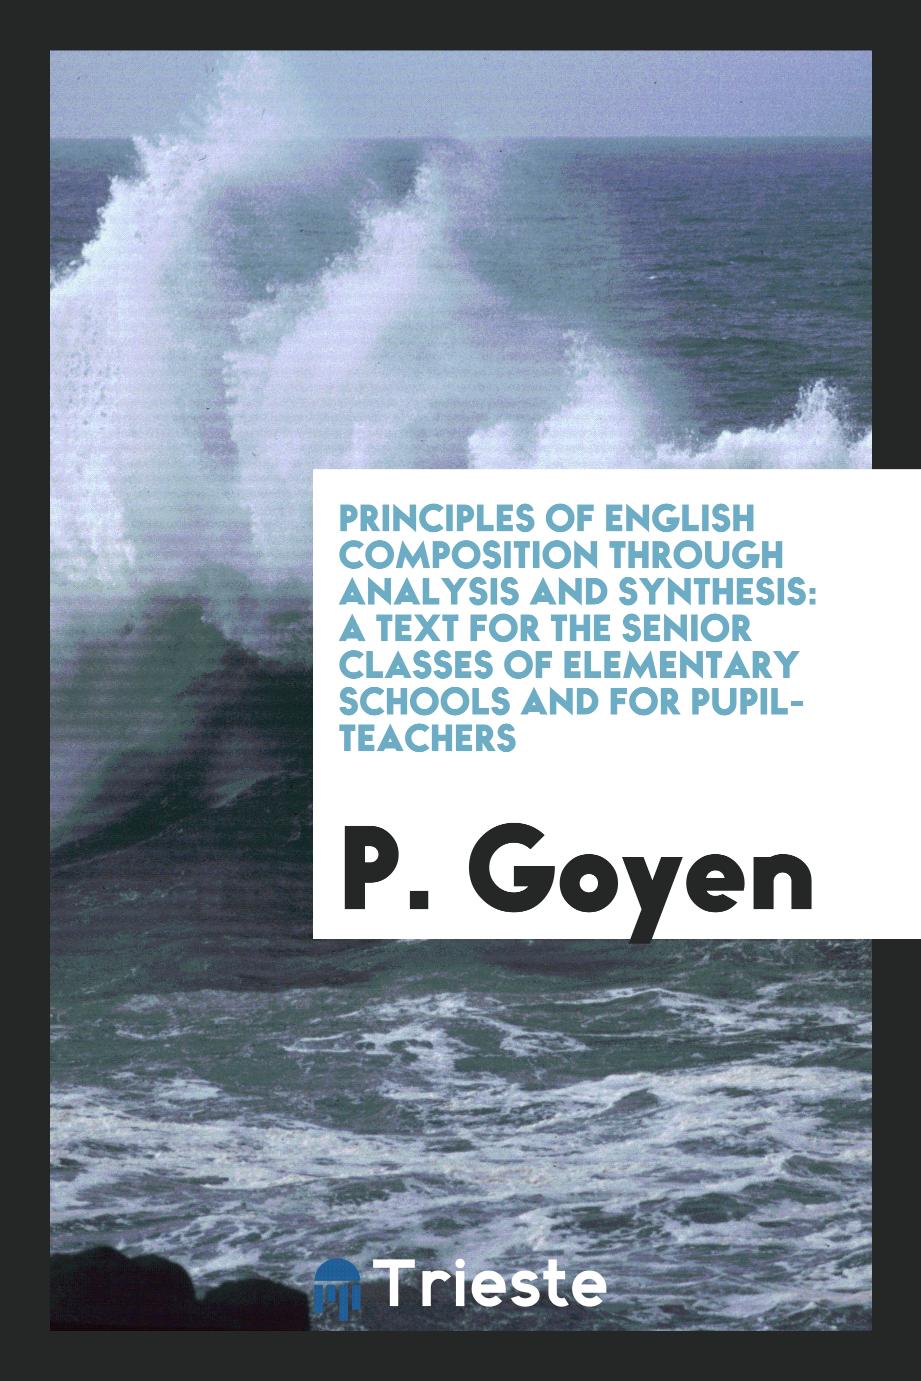 Principles of English Composition Through Analysis and Synthesis: A Text for the Senior Classes of Elementary Schools and for Pupil-Teachers